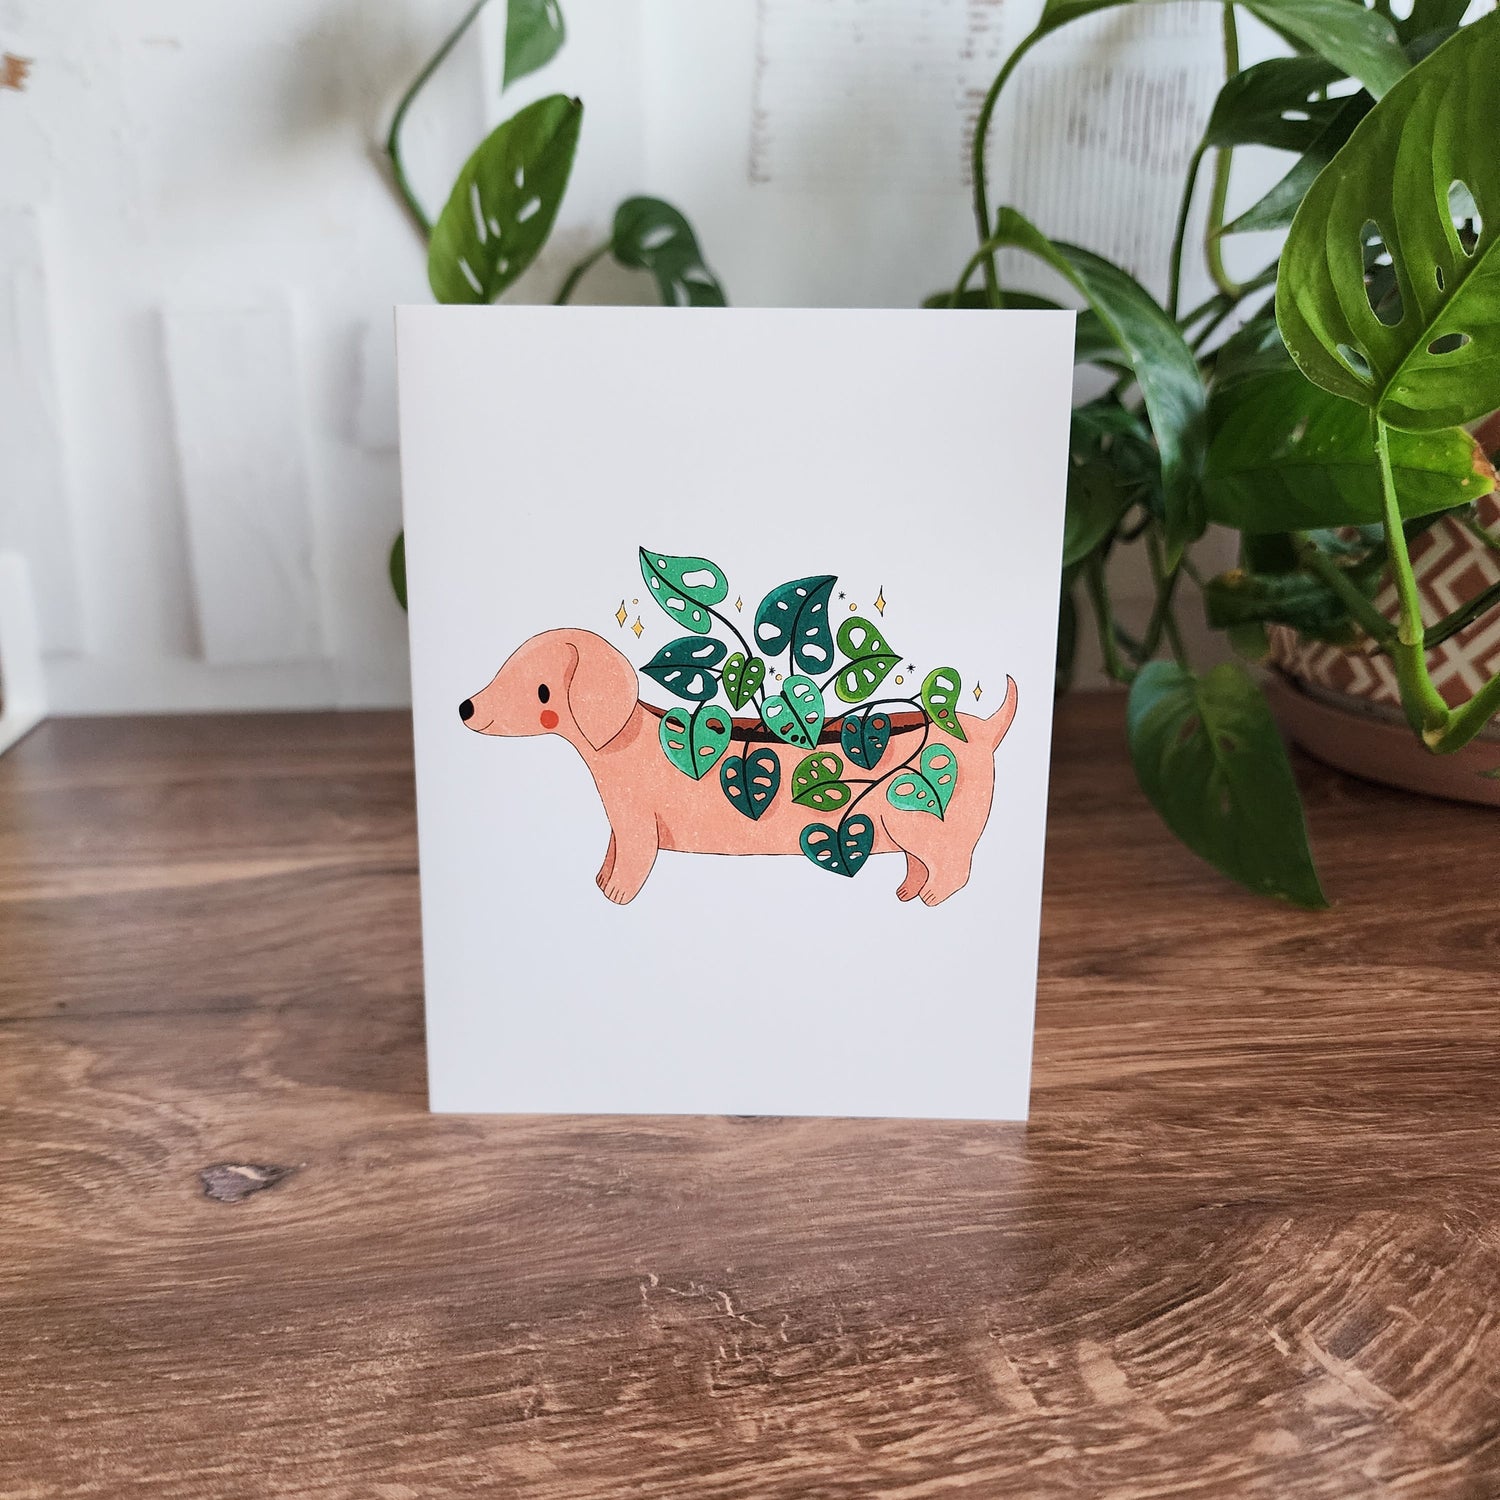 dachshund planter greeting card sitting in front of a plant